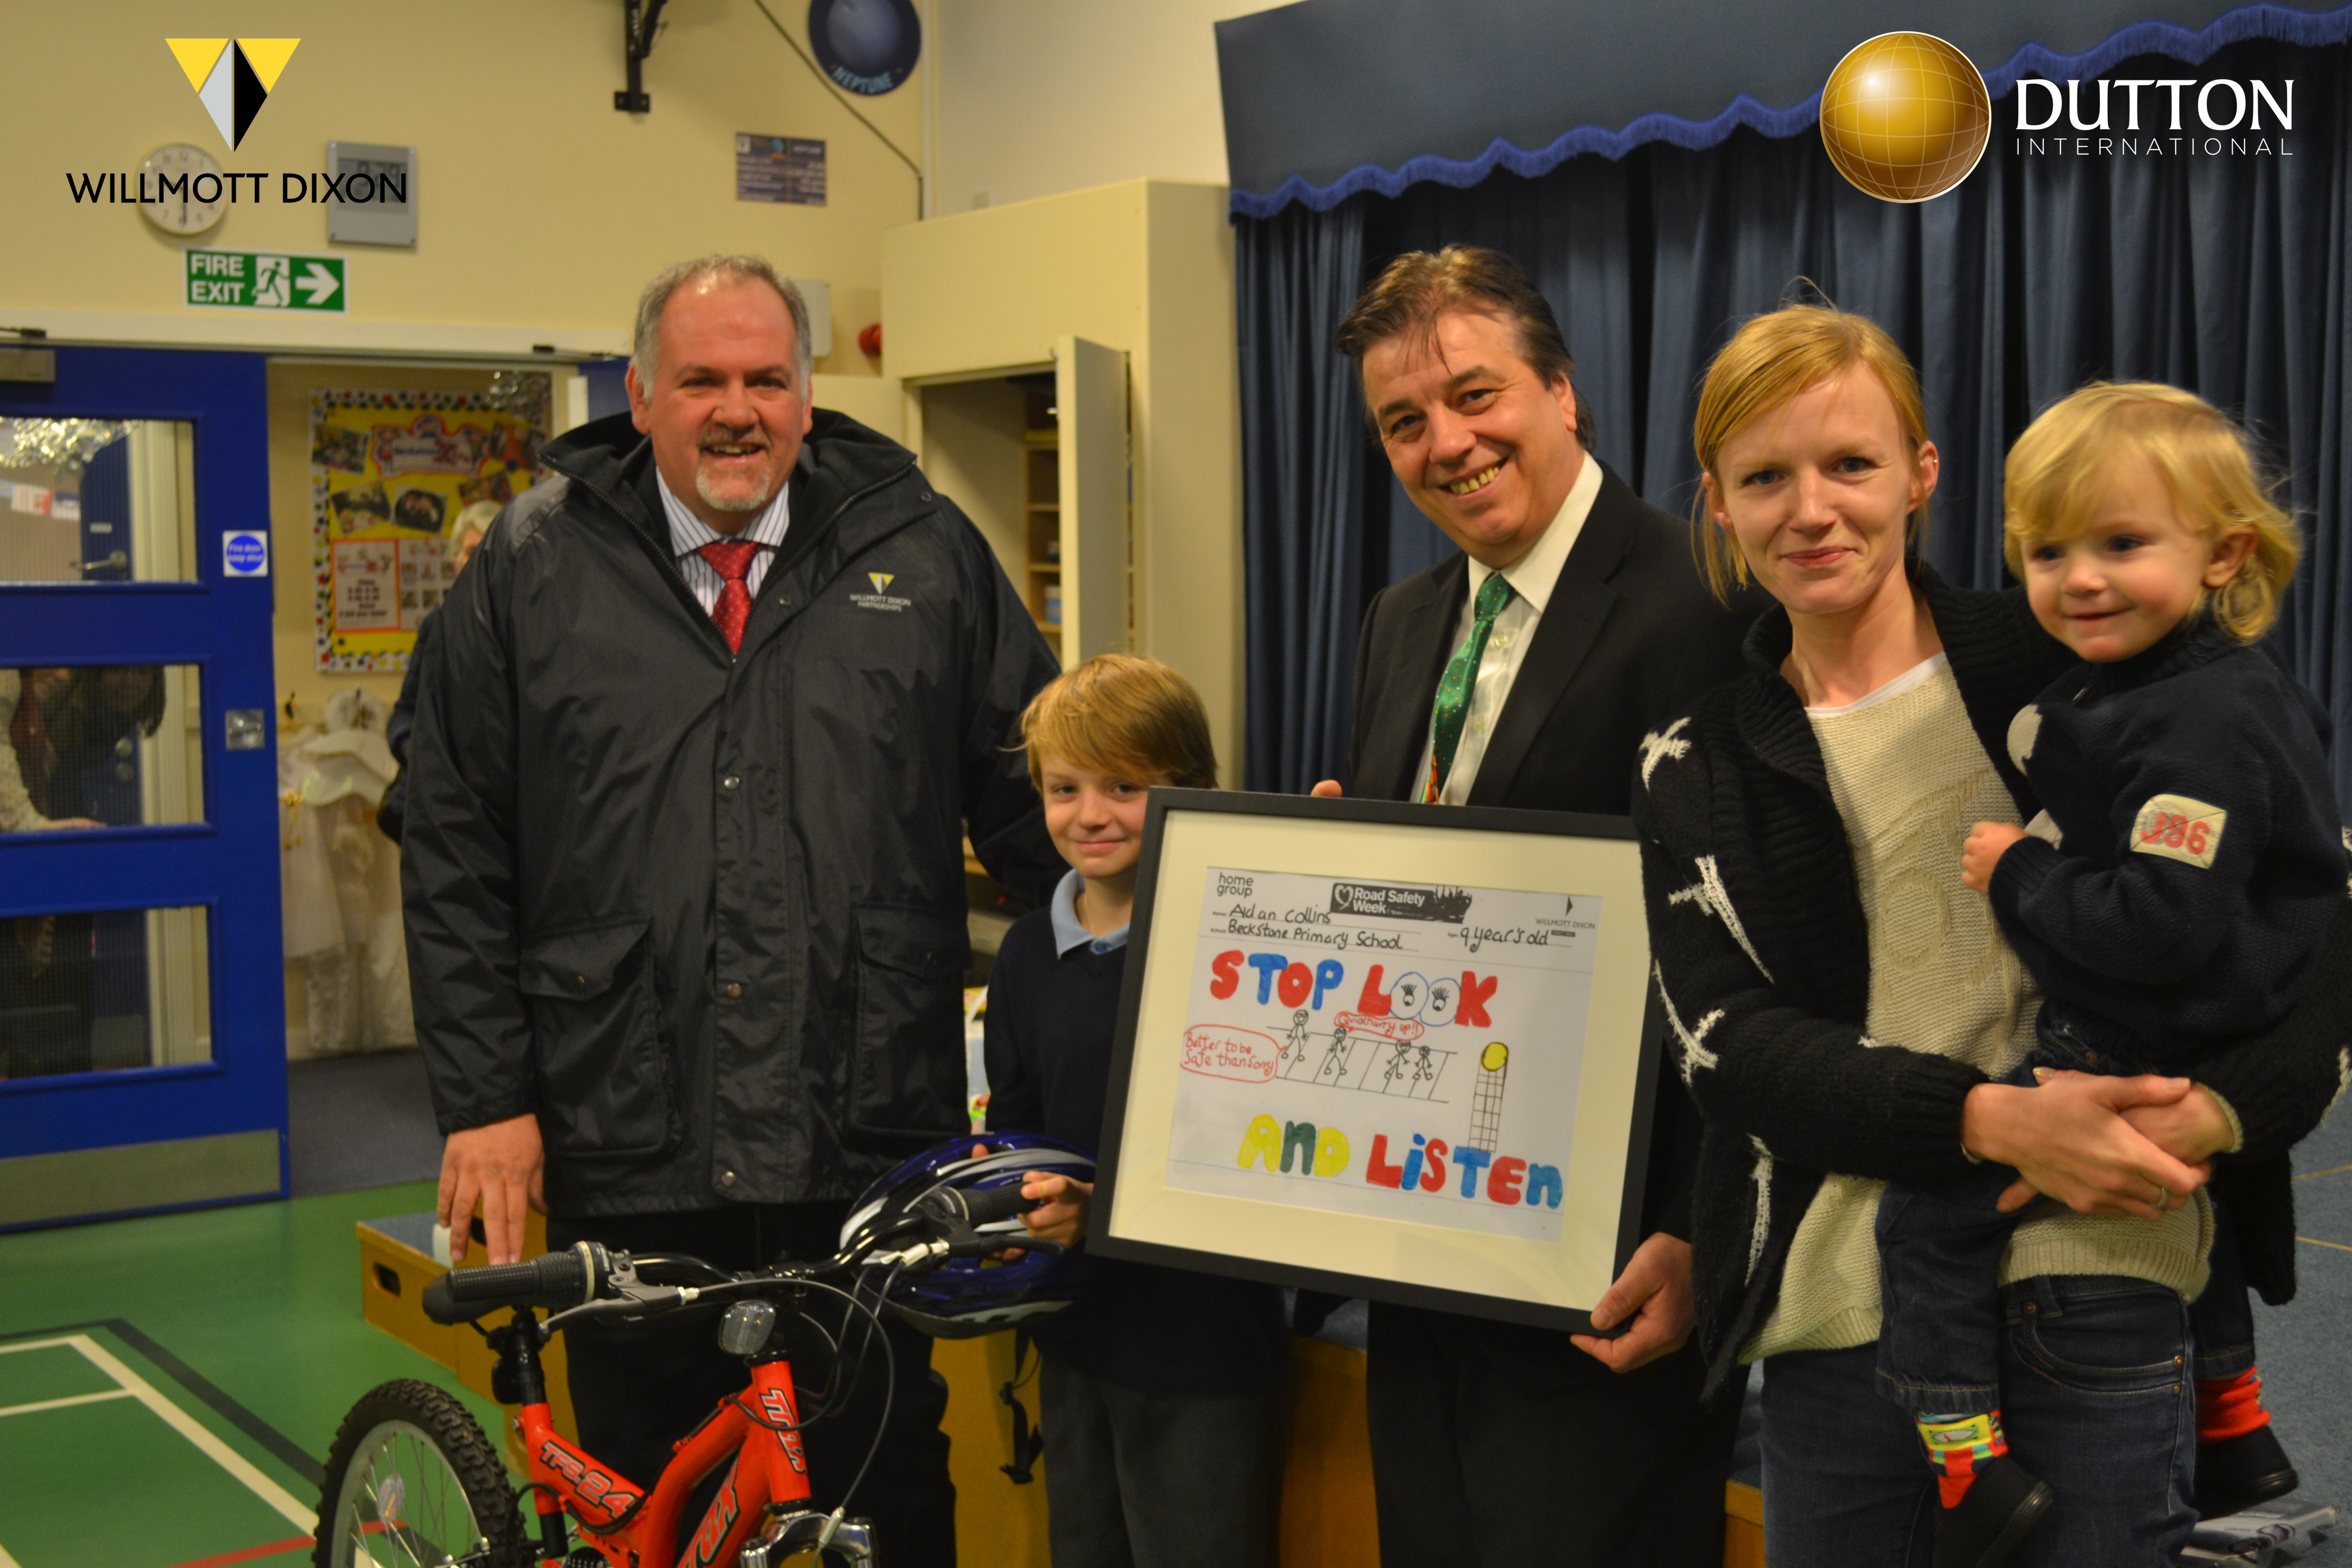 Aiden Collins from Beckstone Primary School, Workington is presented with his winning entry and a brand new bike courtesy of Dutton International